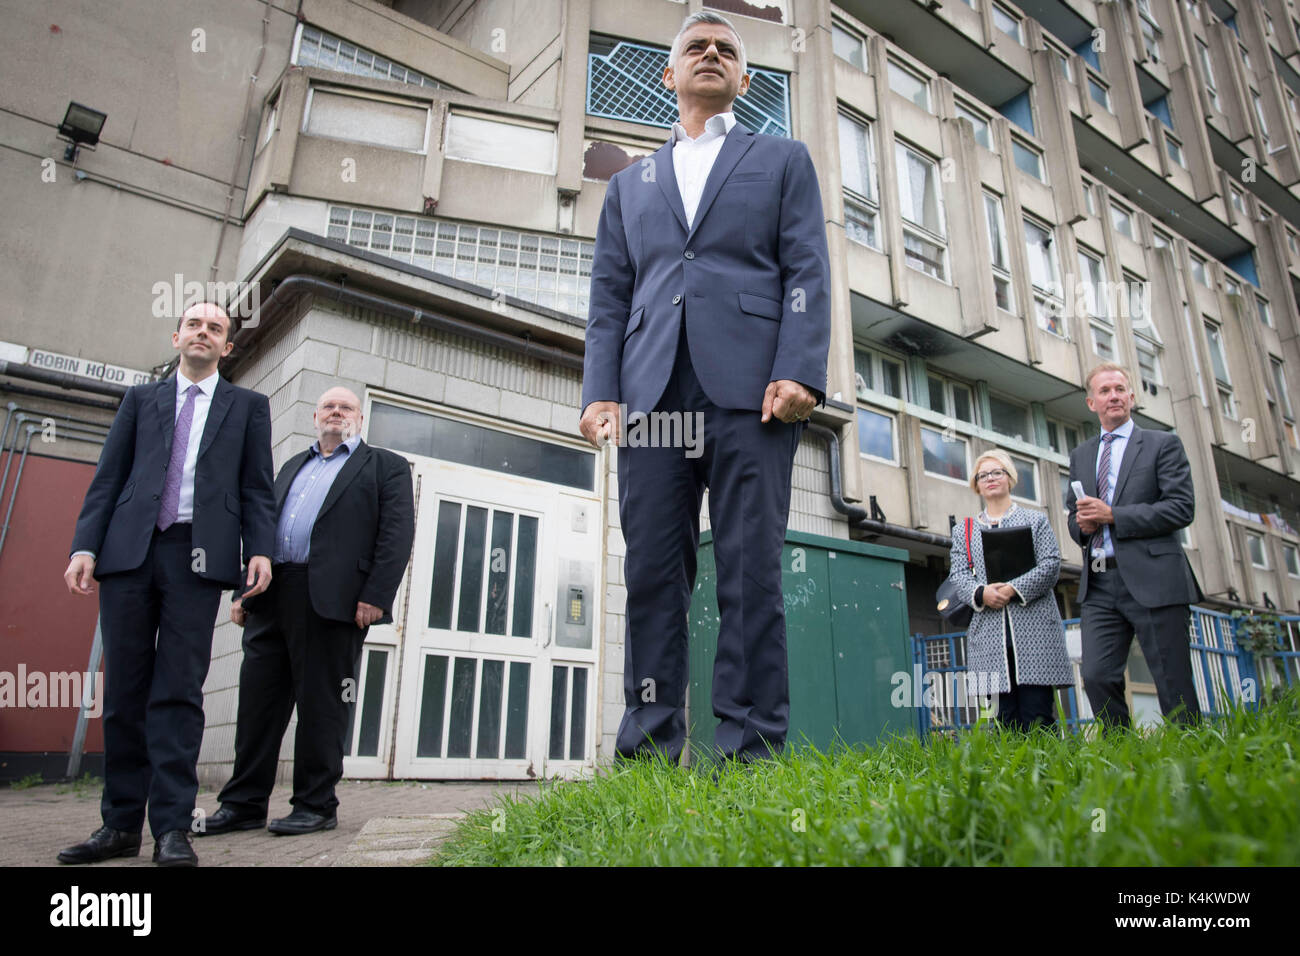 Mayor of London Sadiq Khan visits the former Robin Hood Garden Estate in east London where he saw the &Acirc;£300 million regeneration that is transforming it into 1,575 new homes, 679 of which will be affordable, as he launches his London Housing Strategy. Stock Photo